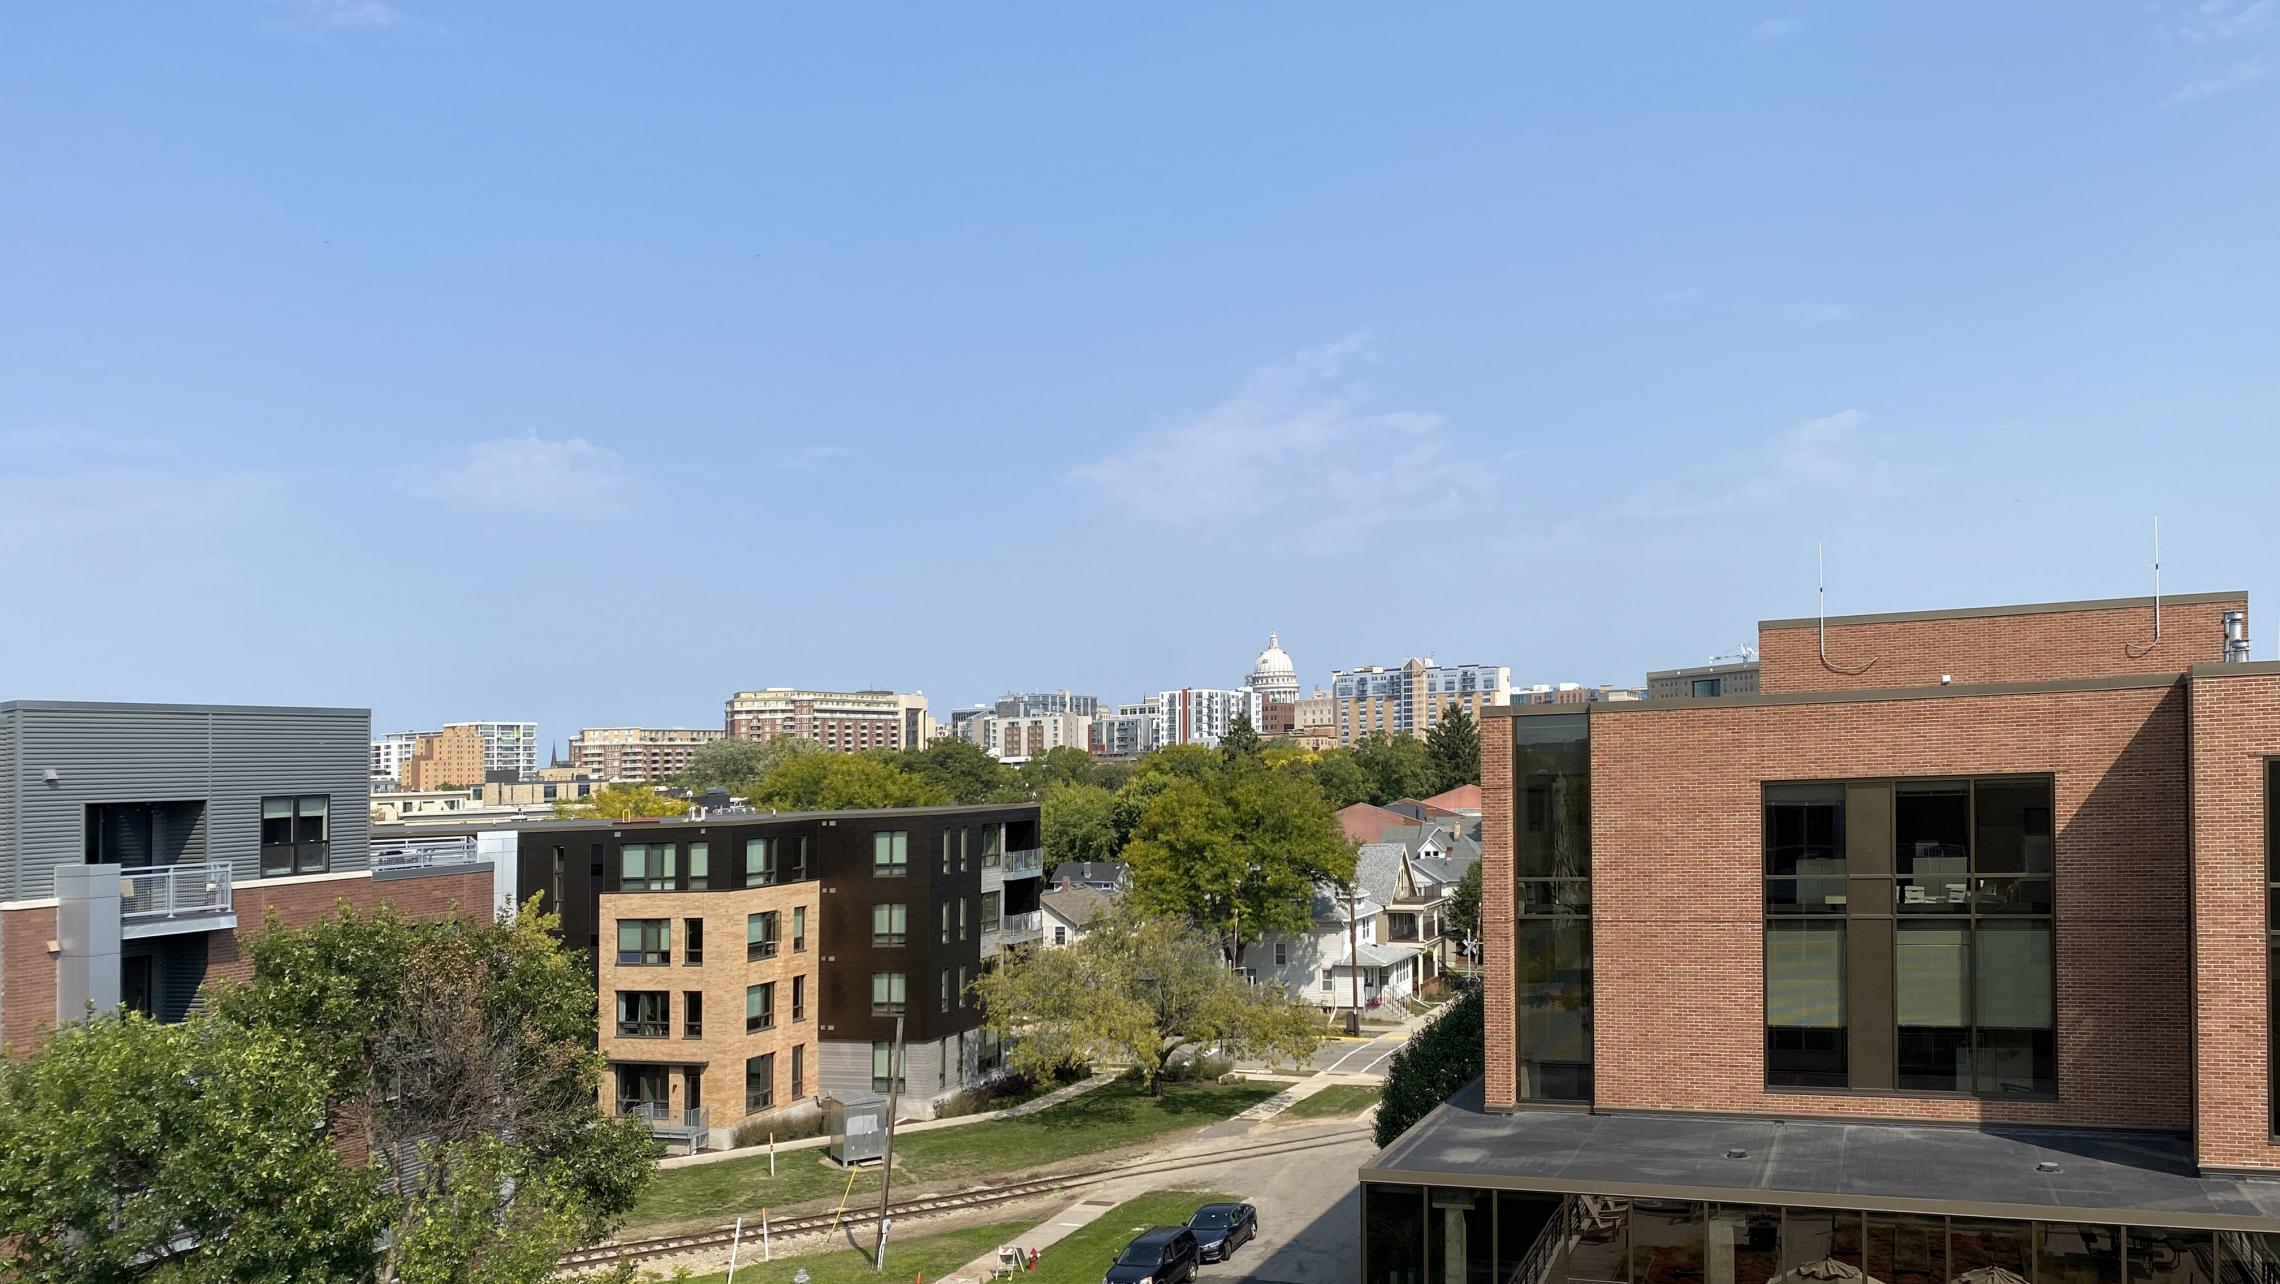 Nine-Line-at-The-Yards-Apartment-503-Two-Bedrom-Corner-Capitol-View-Balcony-Fitness-Kitchen-Living-Dining-Natural-Light-Modern-Upscale-Luxury-Maidson-Lake-Bike-Path-Dogs-Cats